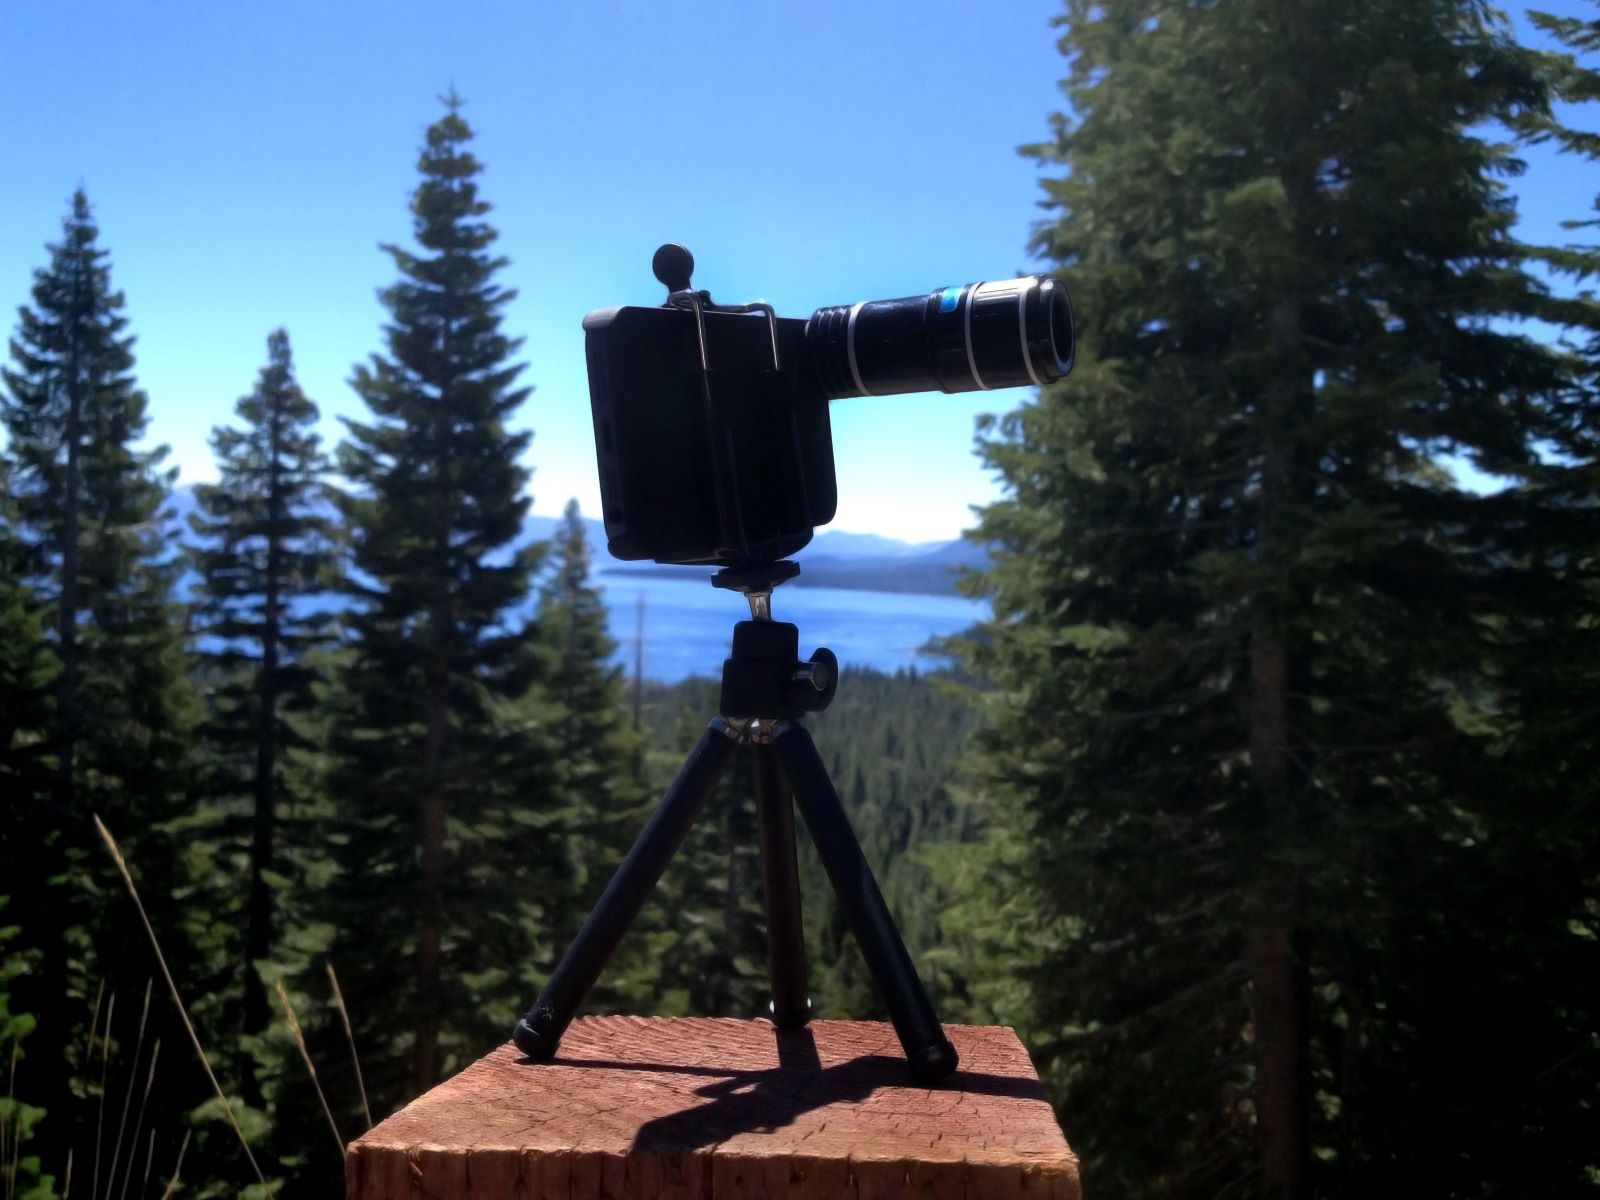 telephoto-stability-attaching-and-stabilizing-a-telephoto-lens-on-a-tripod